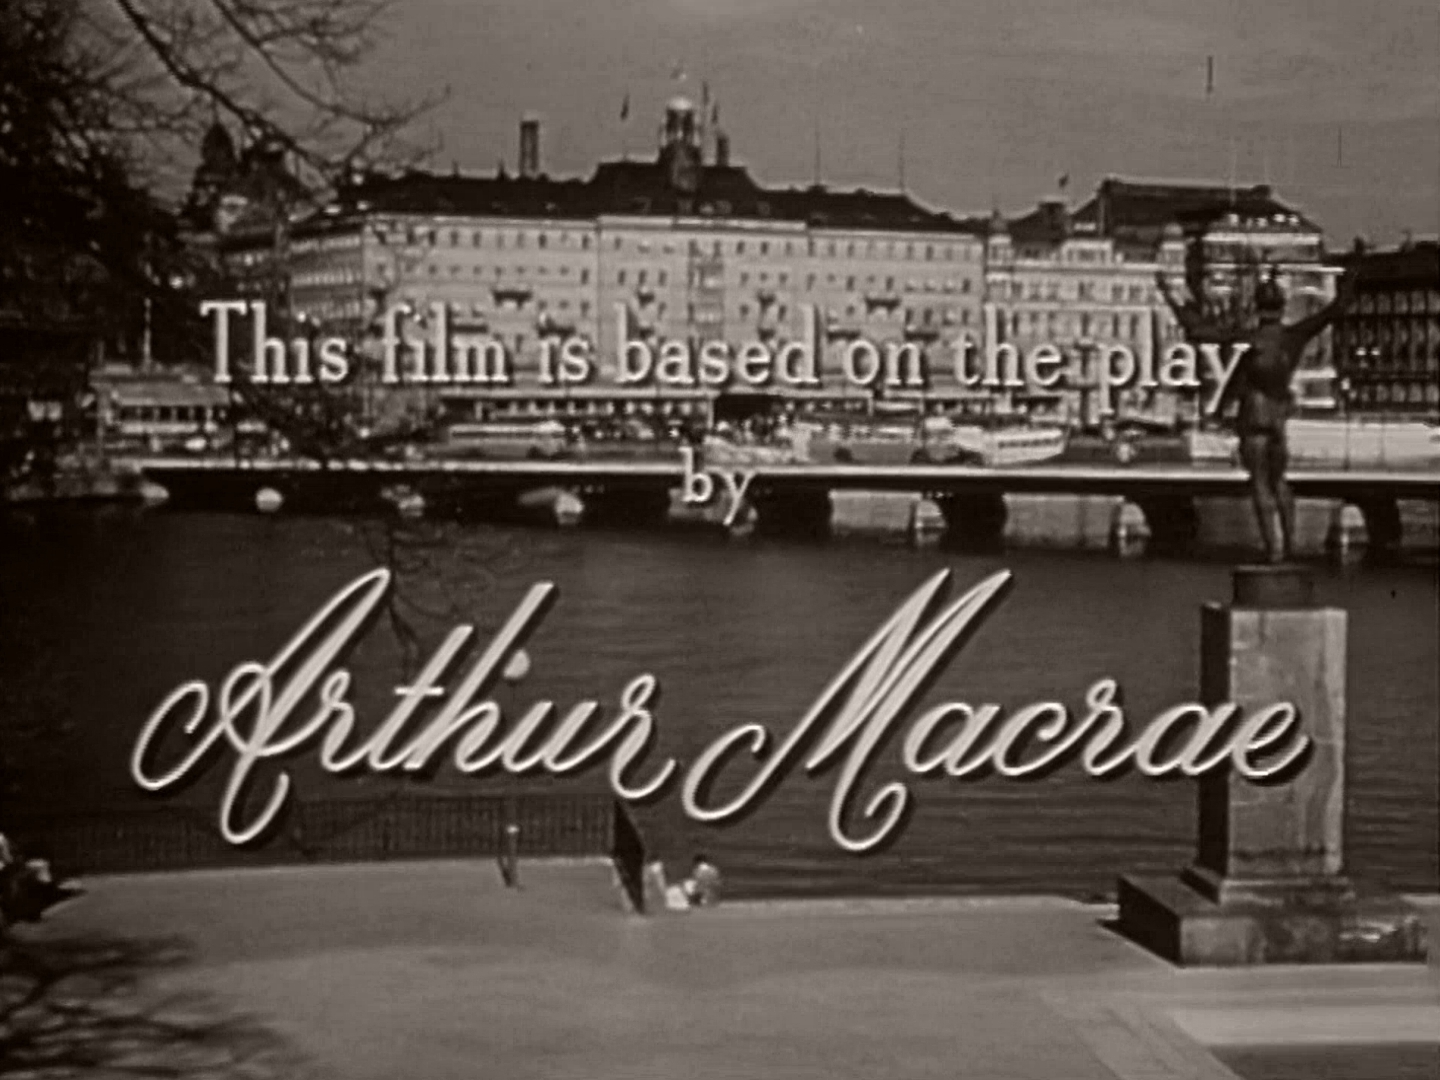 Main title from Traveller’s Joy (1950) (7). This film is based on the play by Arthur Macrae